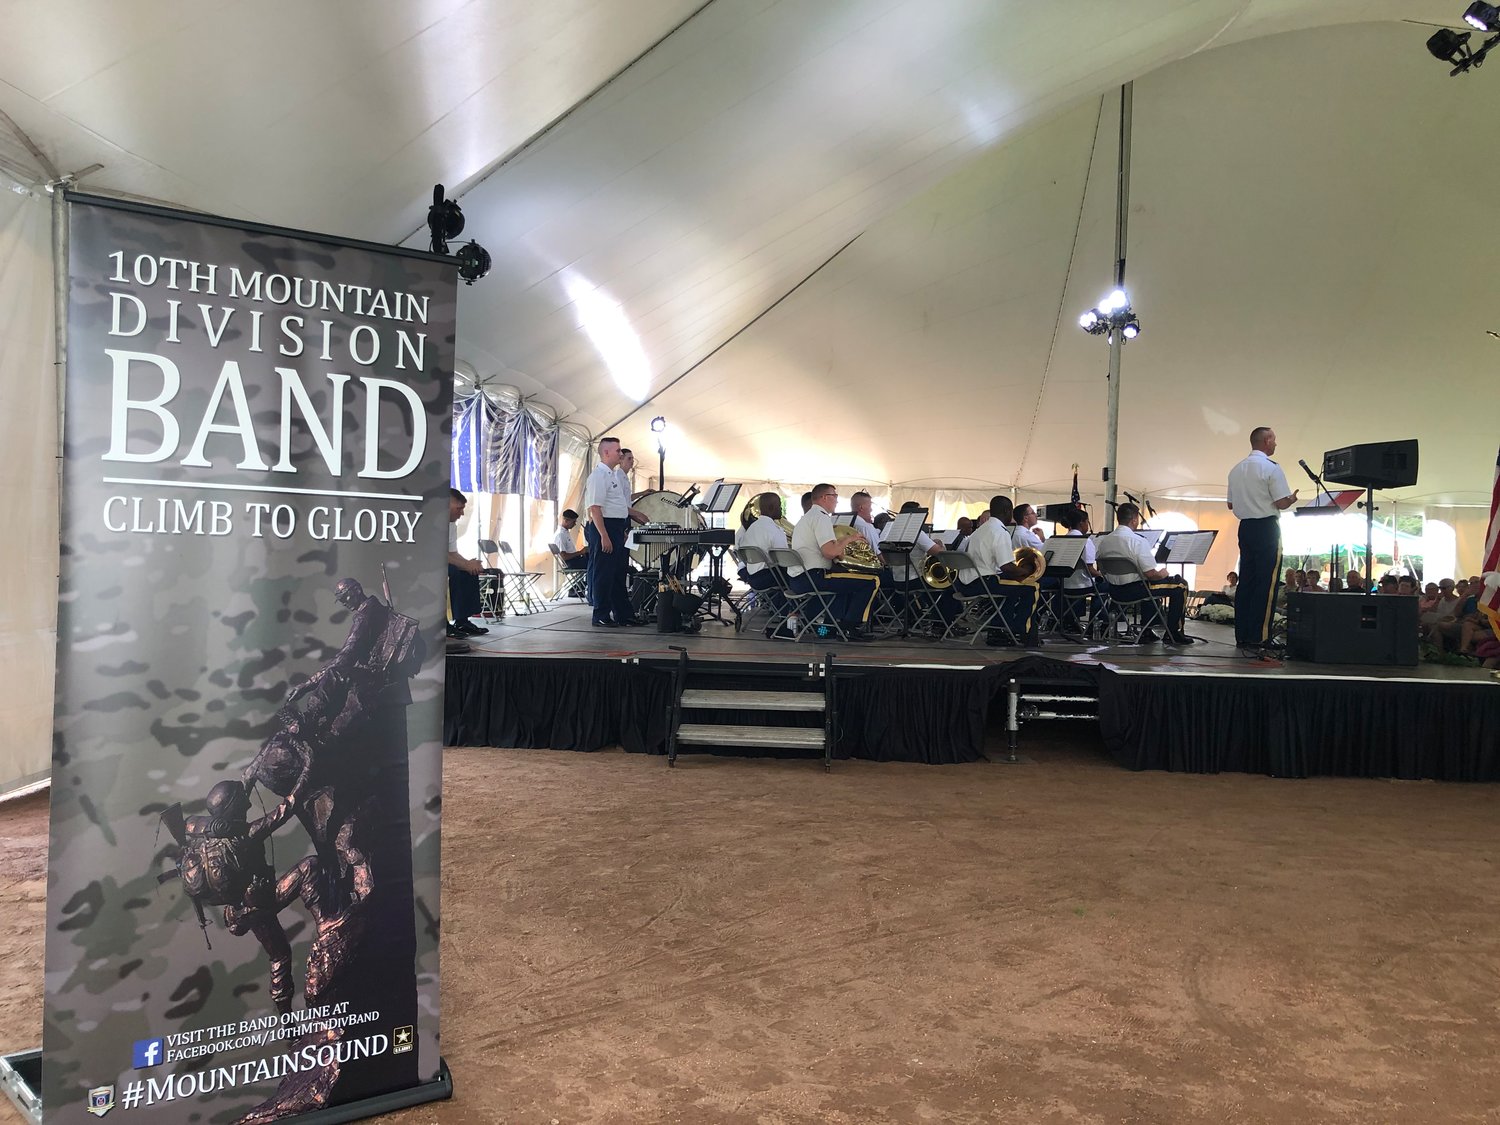 The 10th Mountain Division Army Band will perform a free concert on Sunday, July 31, at Arrowhead Park in Inlet.